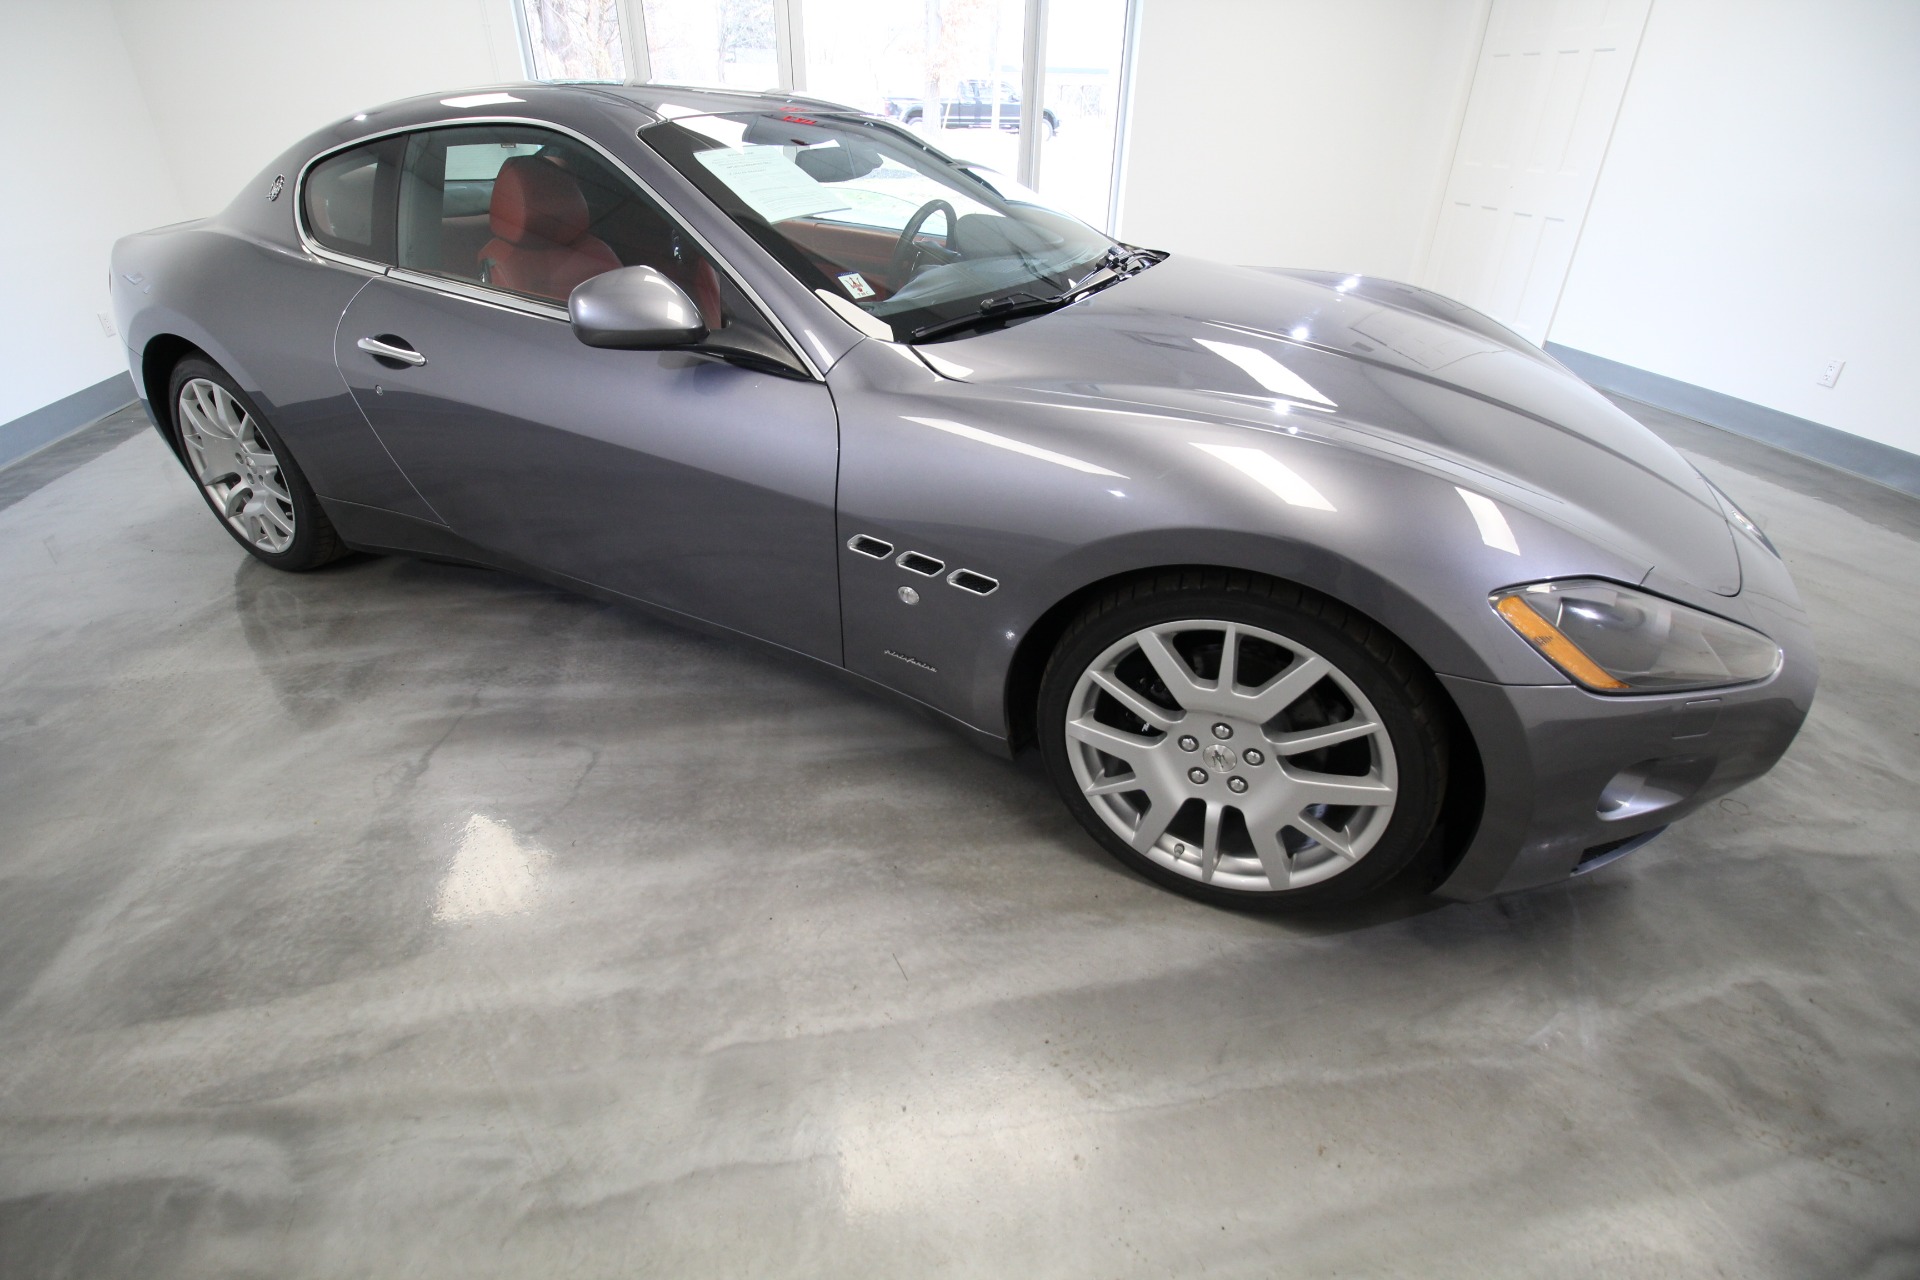 Used 2008 GREY Maserati GranTurismo Coupe LOCAL CAR SOLD BY US AND ALWAYS SERVICED WITH US | Albany, NY